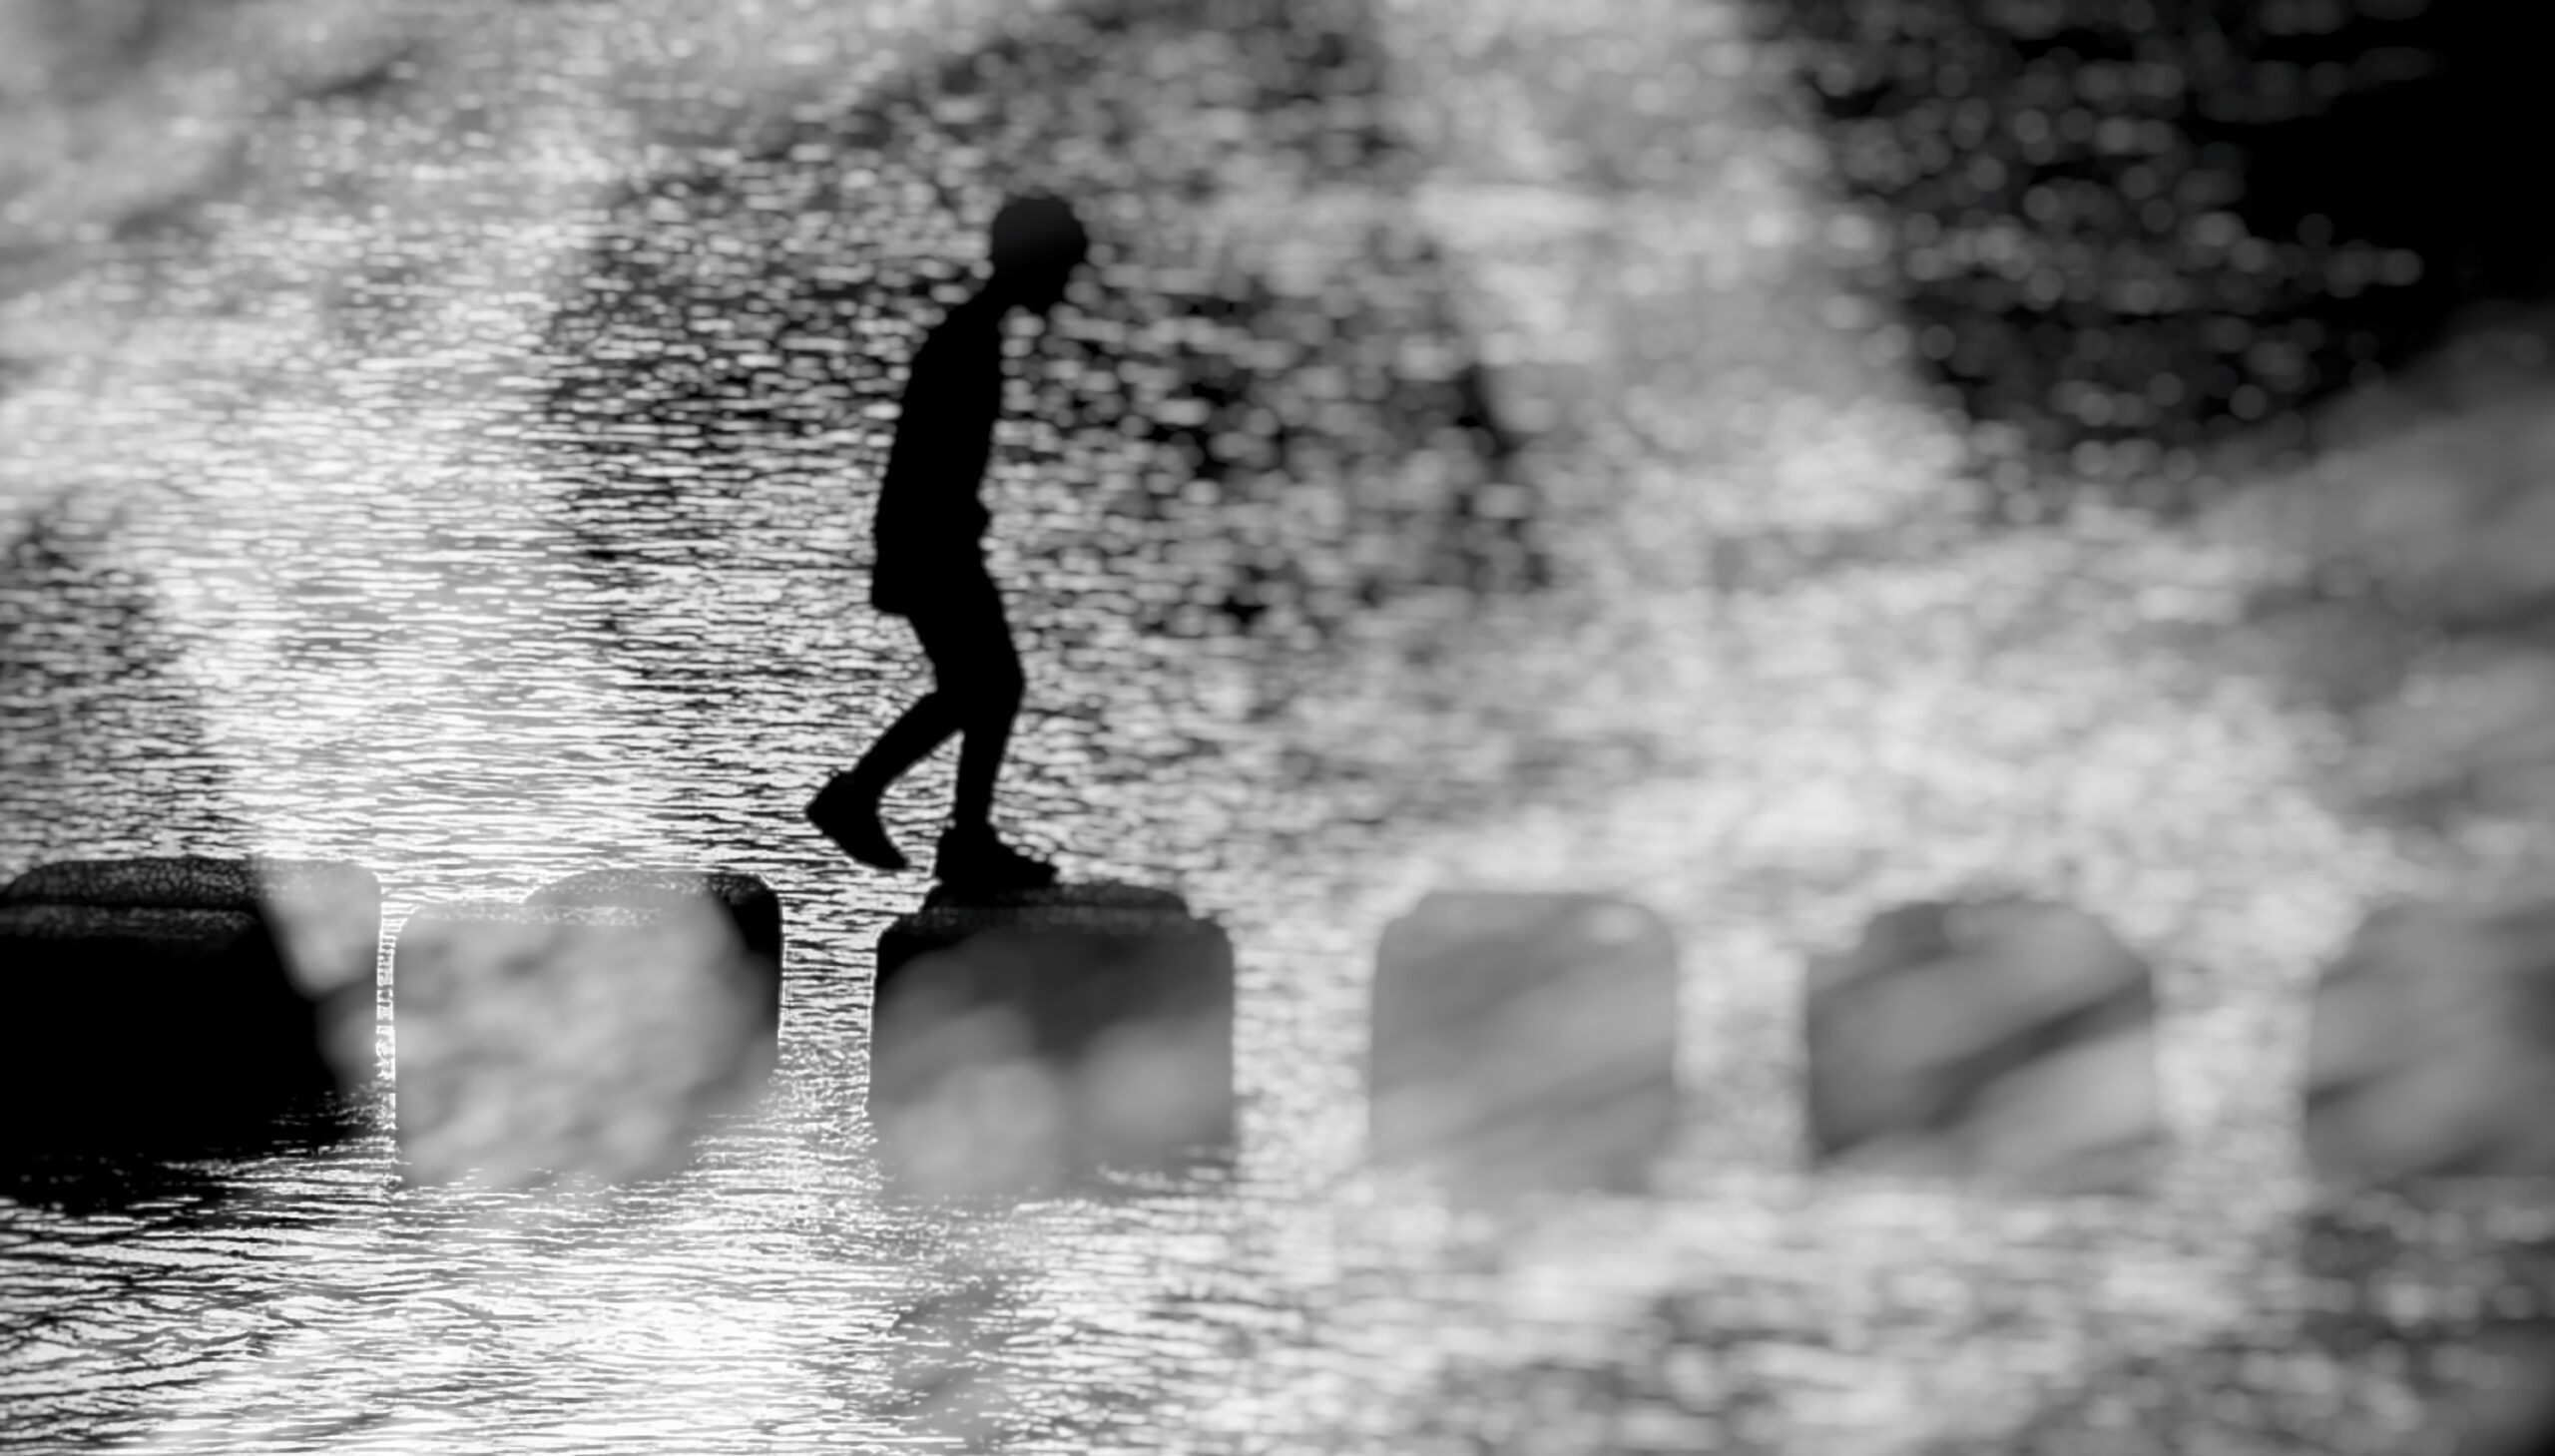 Black and white photo of a child walking on stone steps. The steps are surrounded by water.